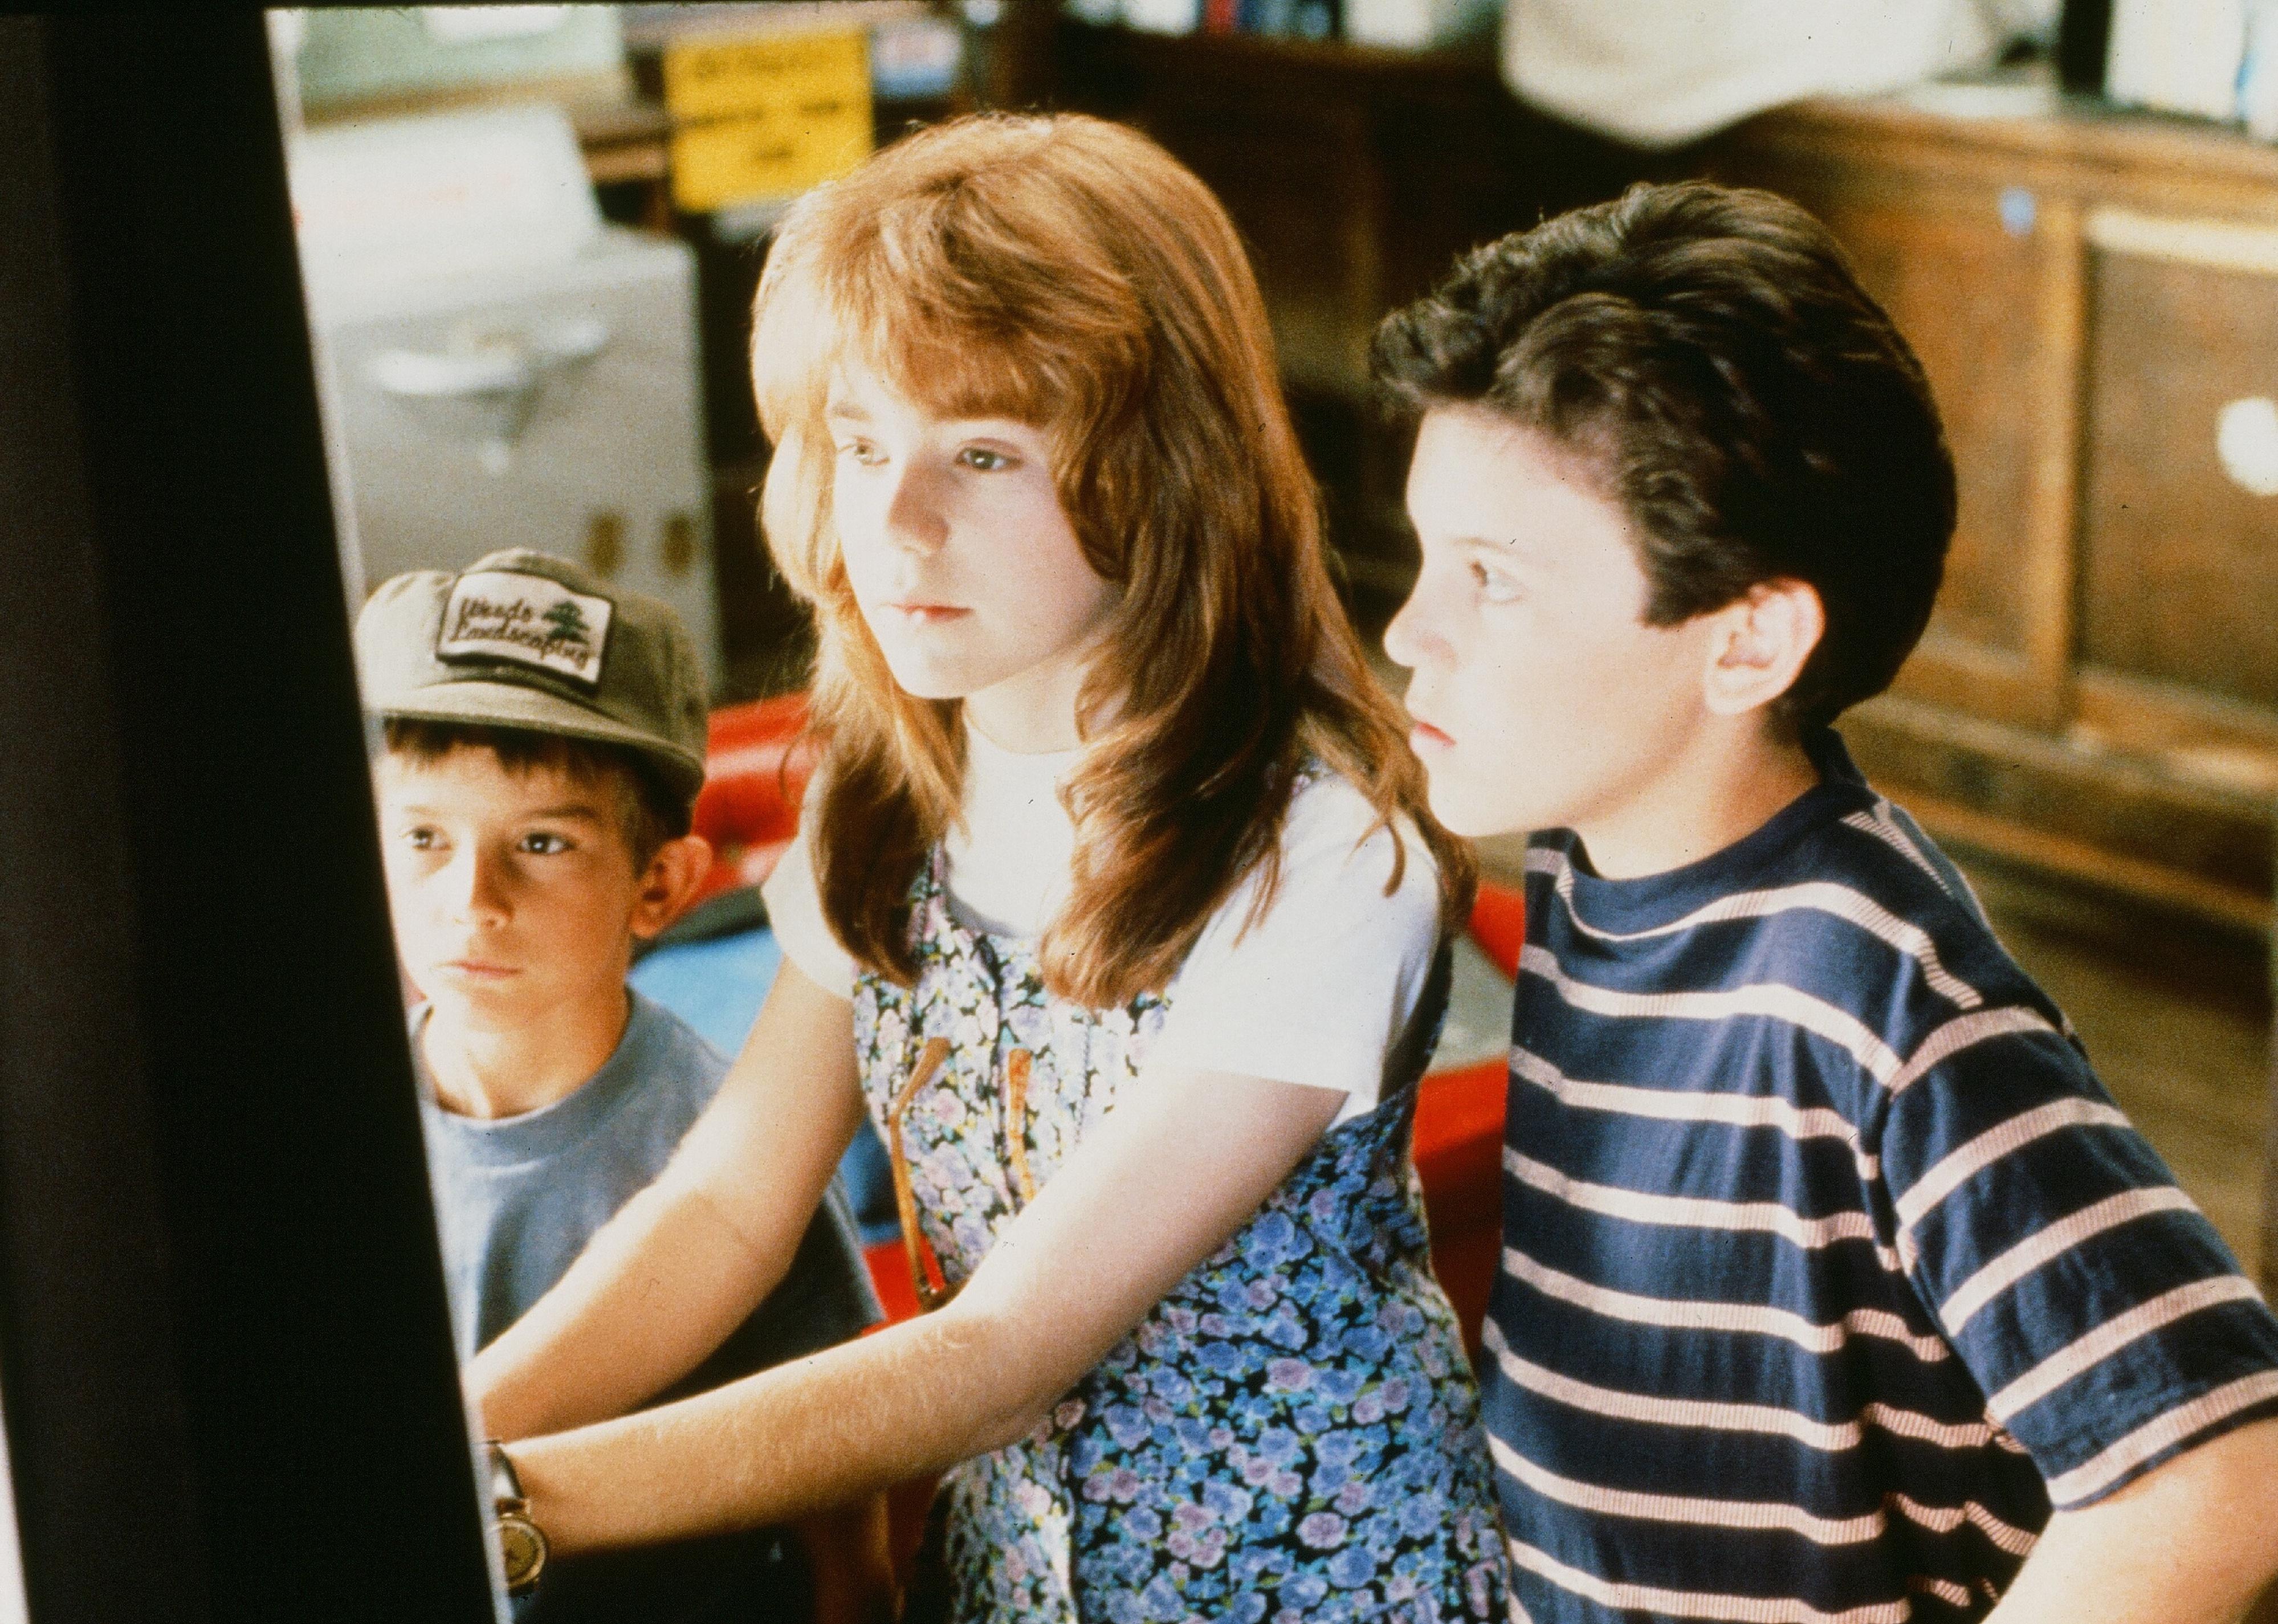 Luke Edwards, Jenny Lewis, and Fred Savage playing a game in a scene from the movie 'The Wizard'.